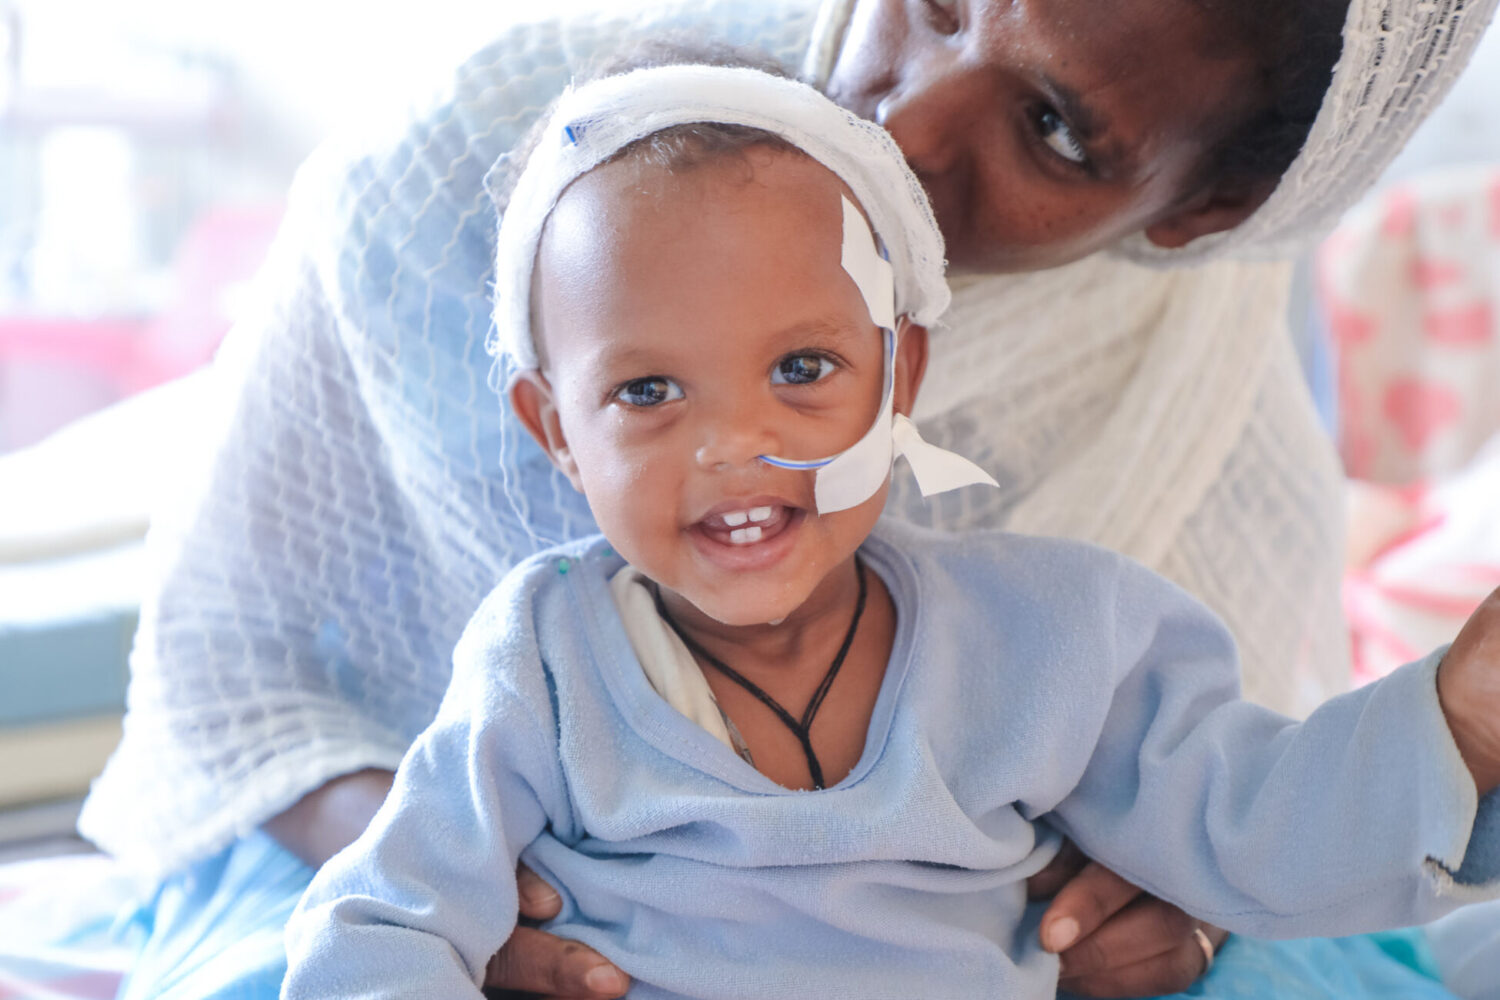 A child from Ethiopia, Tigray smiles in a hospital where he is being treated for severe acute malnutrition.